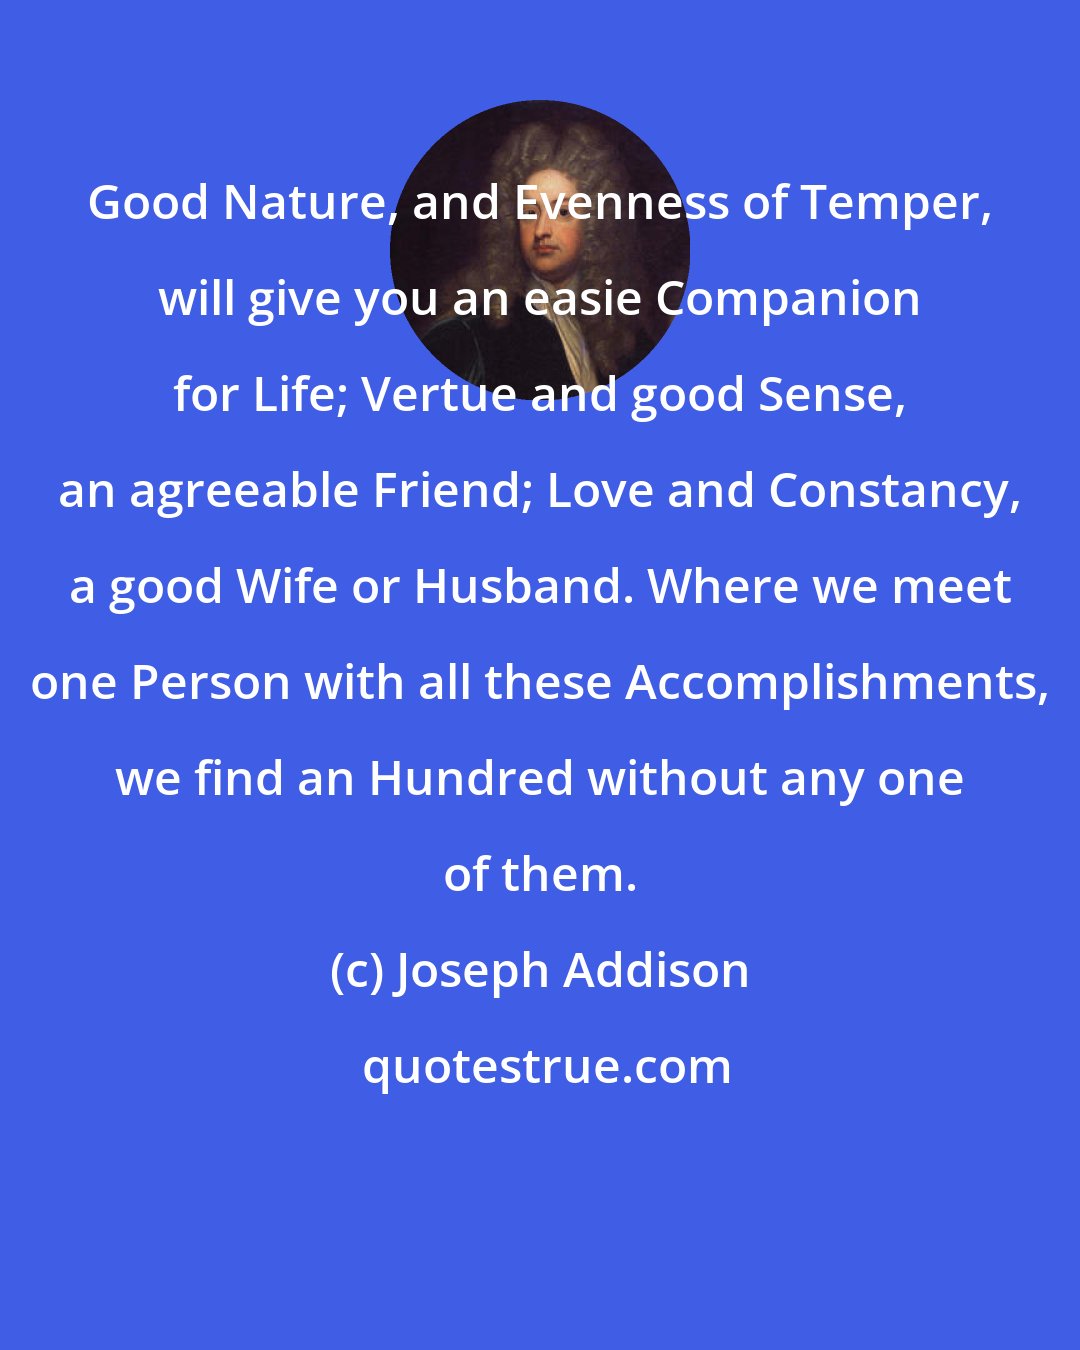 Joseph Addison: Good Nature, and Evenness of Temper, will give you an easie Companion for Life; Vertue and good Sense, an agreeable Friend; Love and Constancy, a good Wife or Husband. Where we meet one Person with all these Accomplishments, we find an Hundred without any one of them.